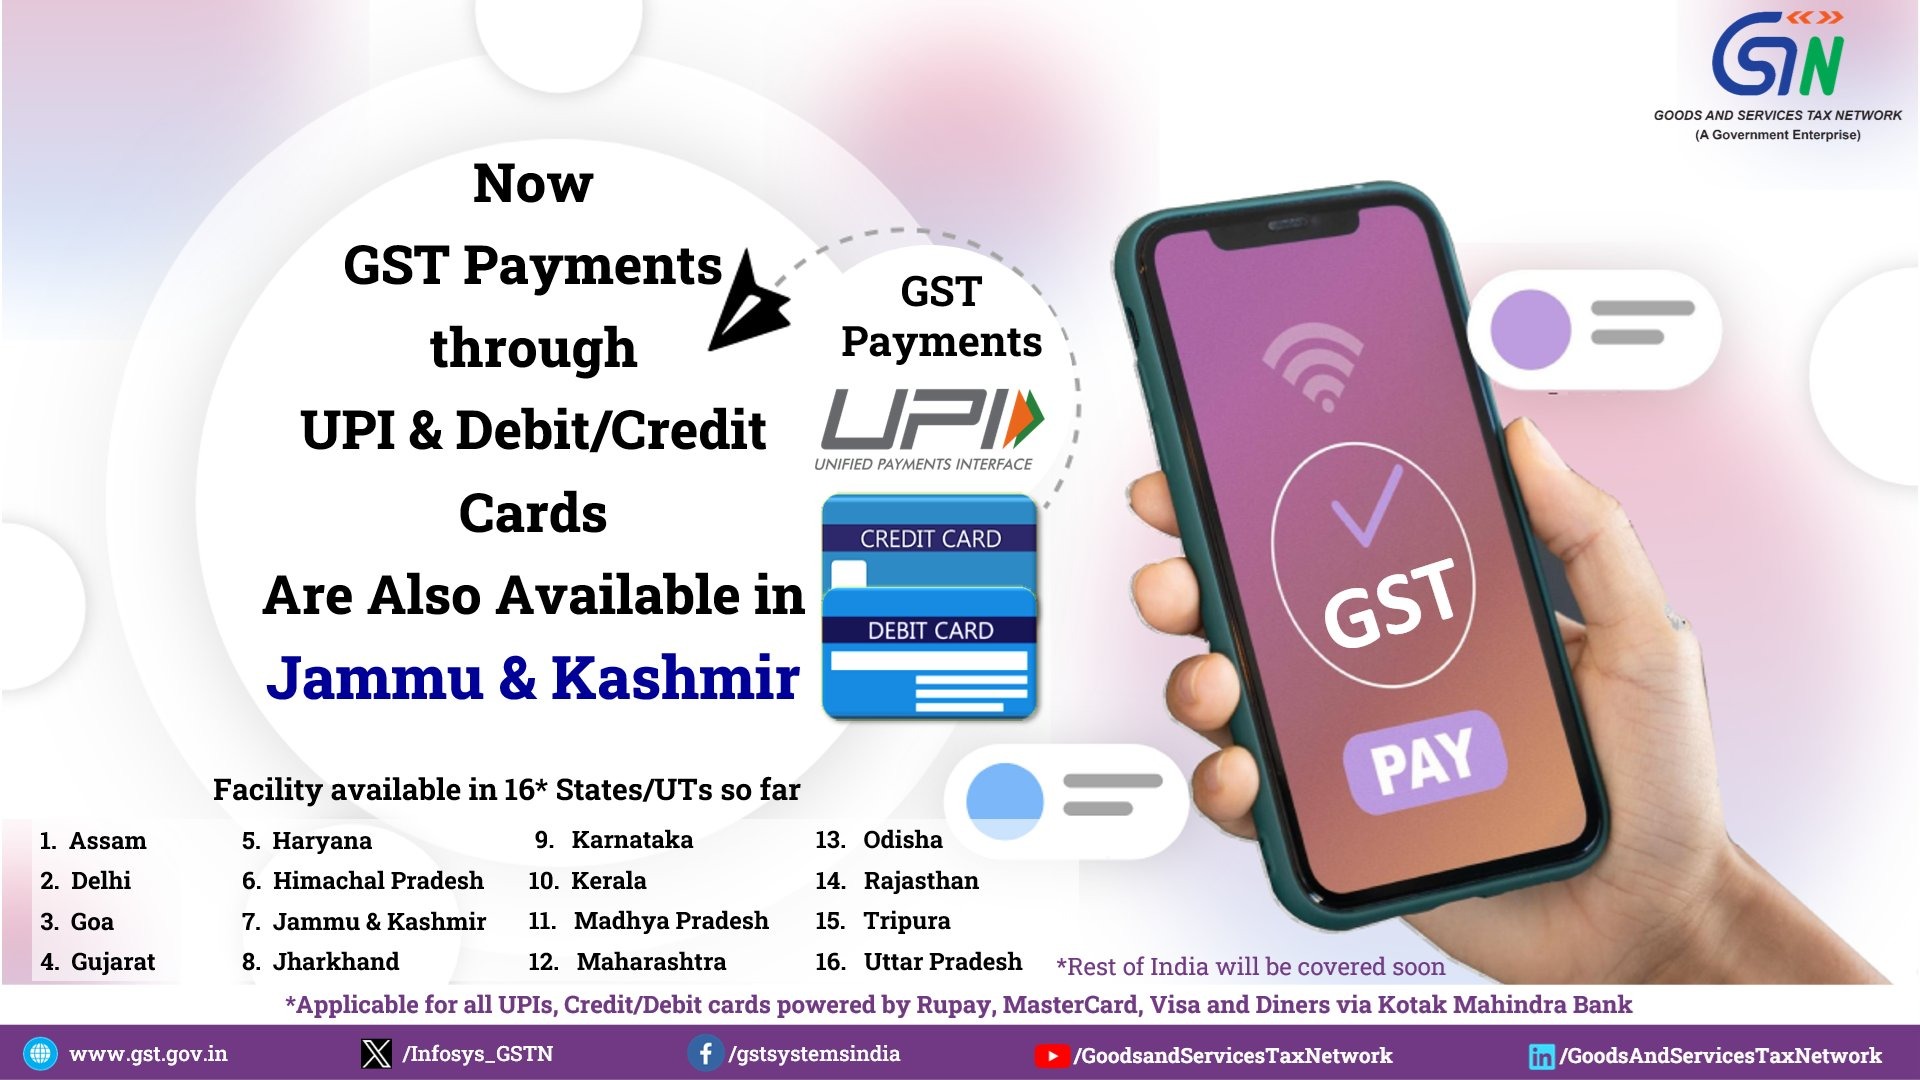 GSTN Expands Digital Payment Options to J&K, Now Covering 16 States/UTs